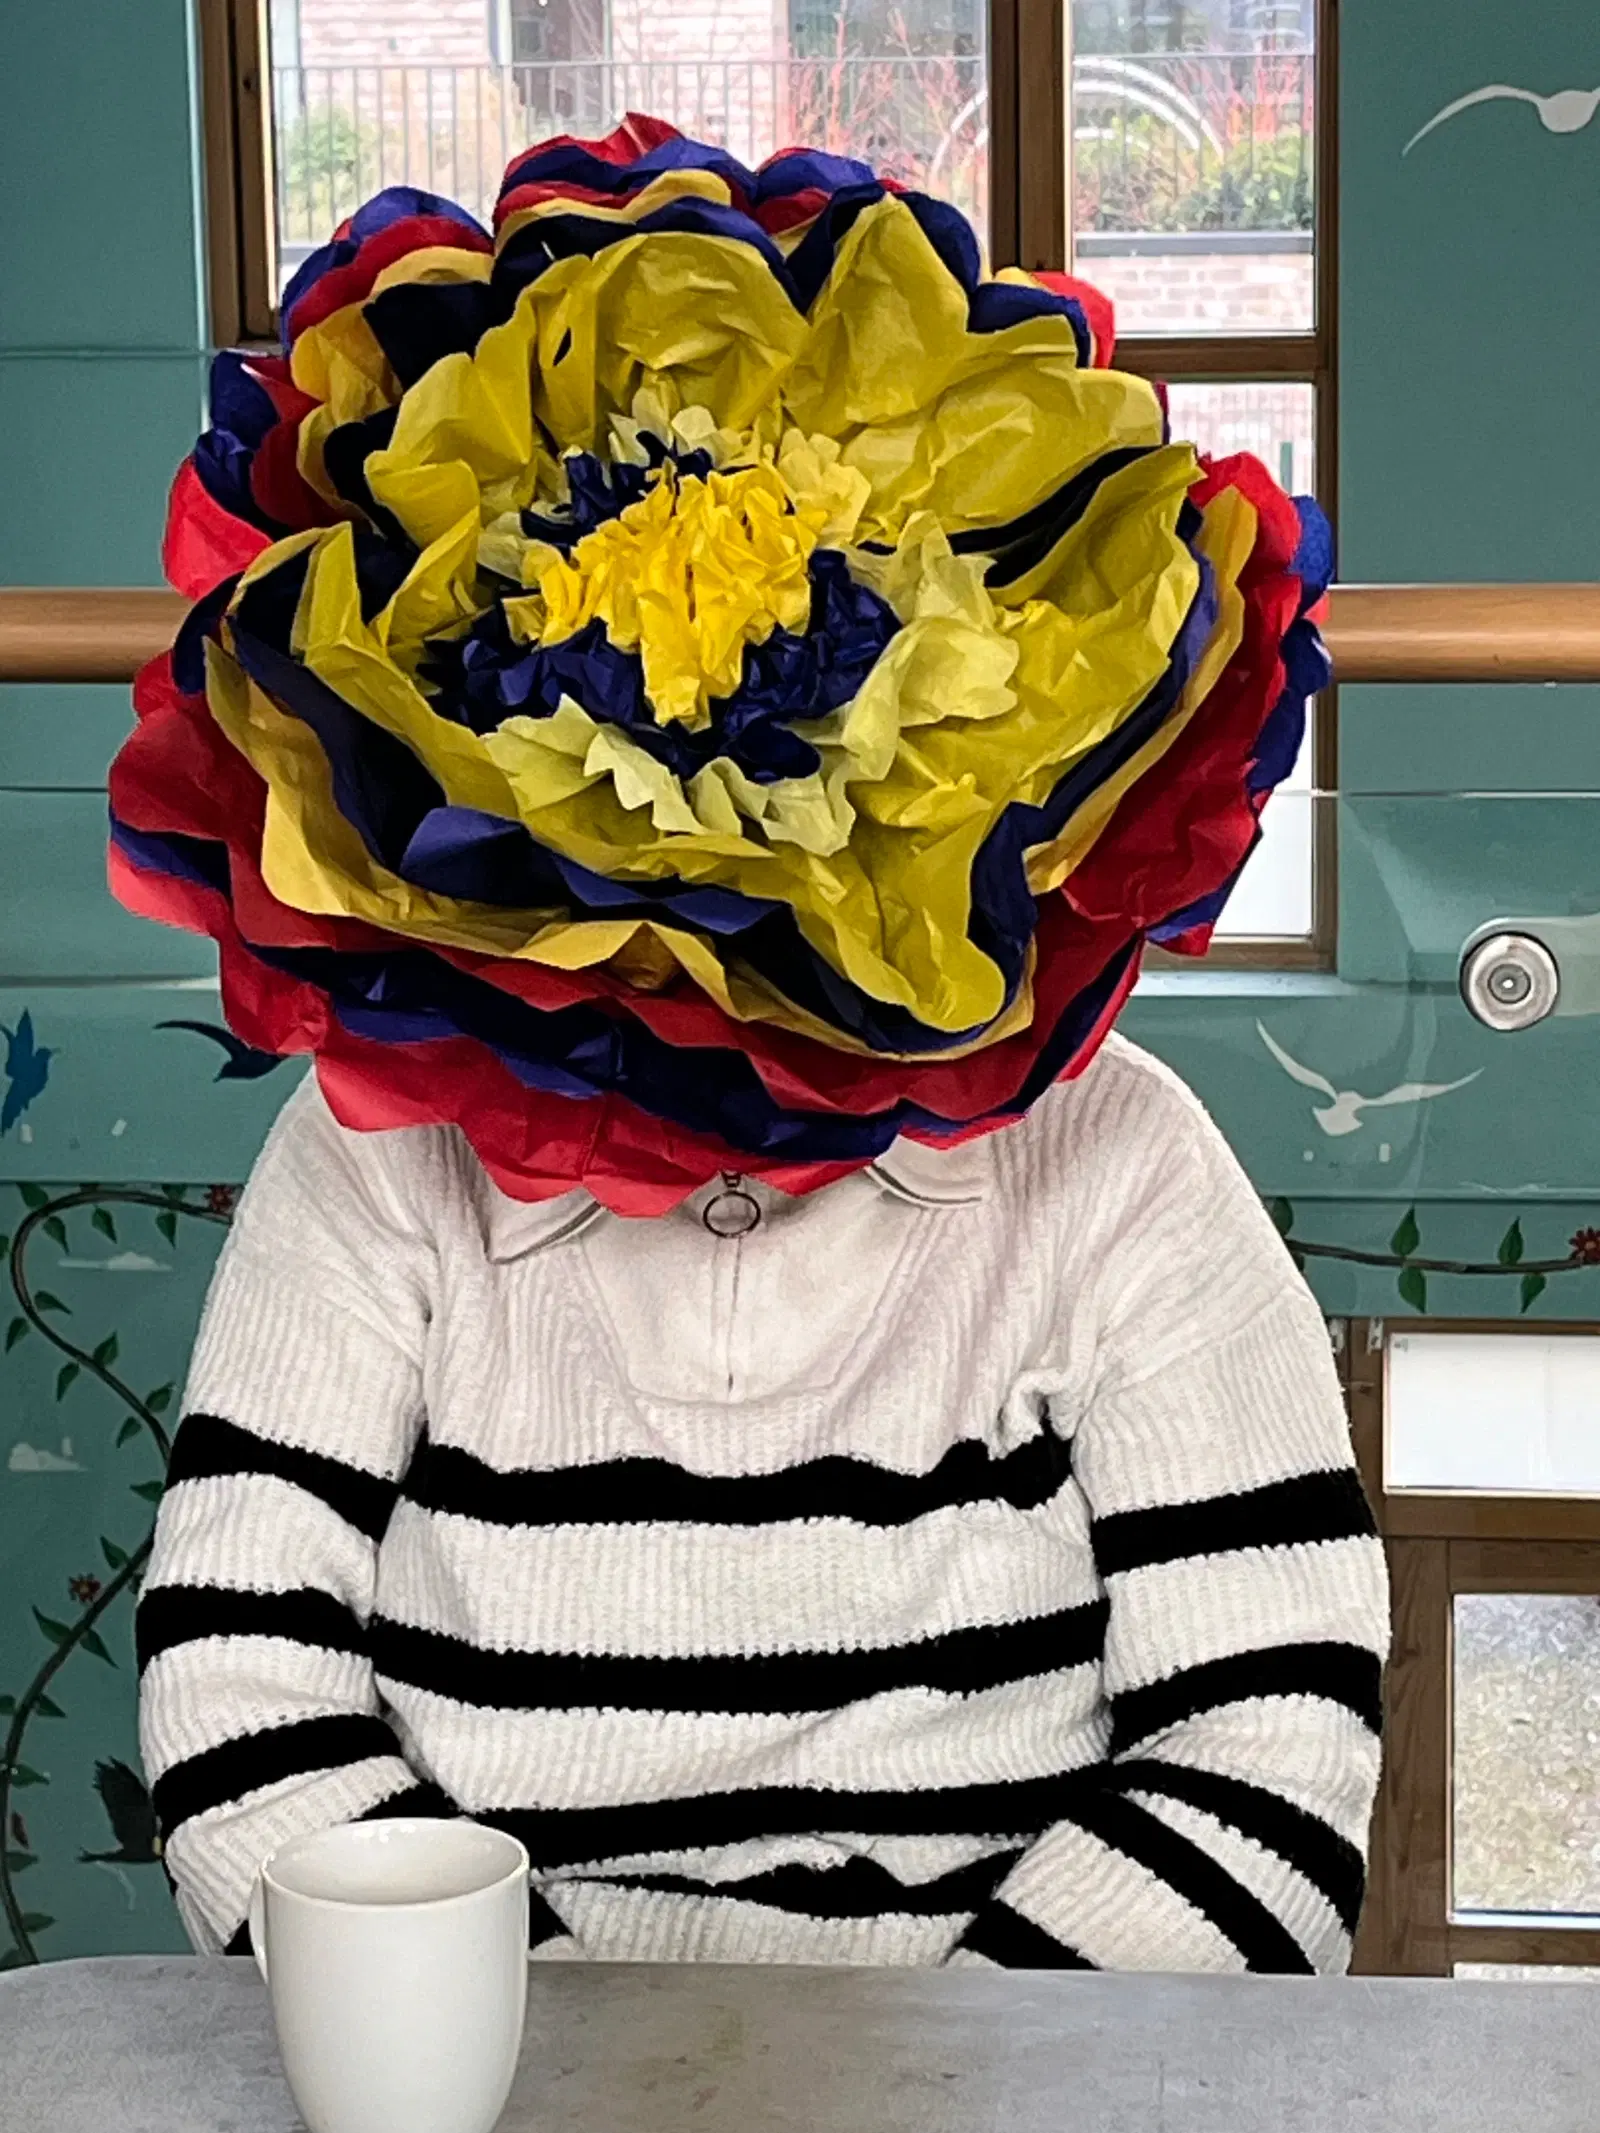 A person seated at a table with an oversized colorful paper flower covering their face, holding a white mug, against a background of windows with garden views.